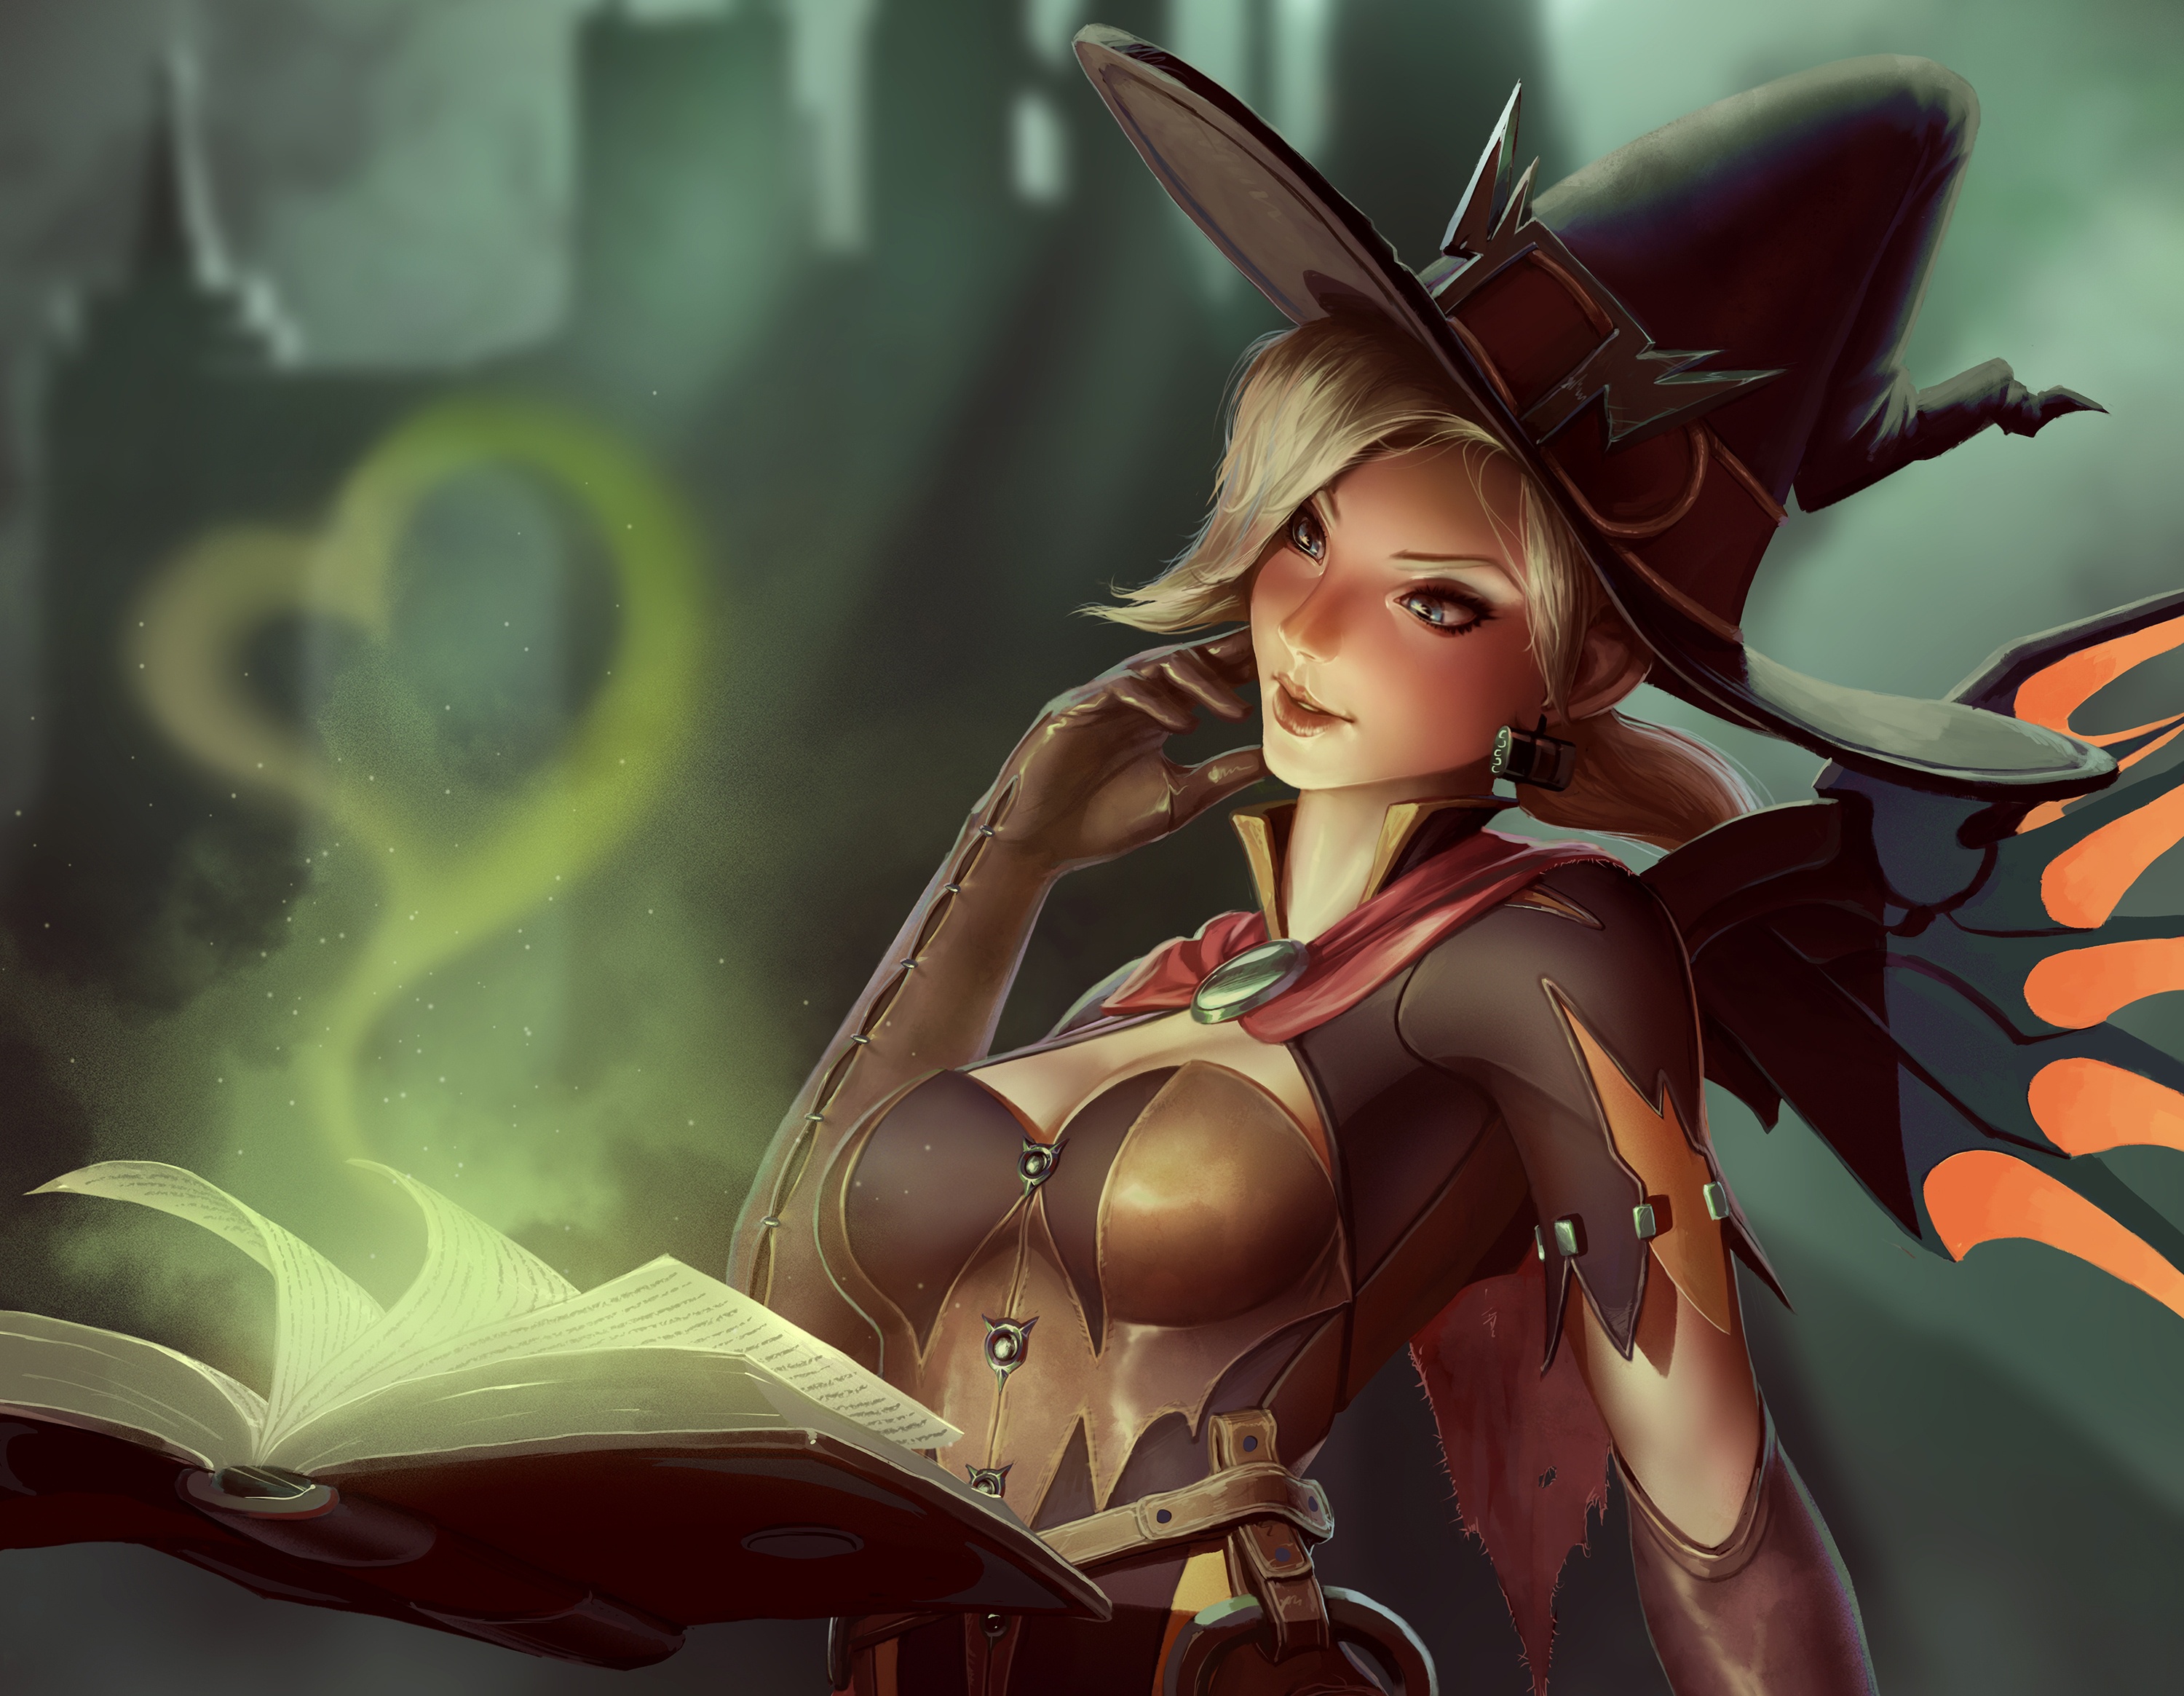 witch mercy wallpaper,cg artwork,fictional character,illustration,adventure game,elf